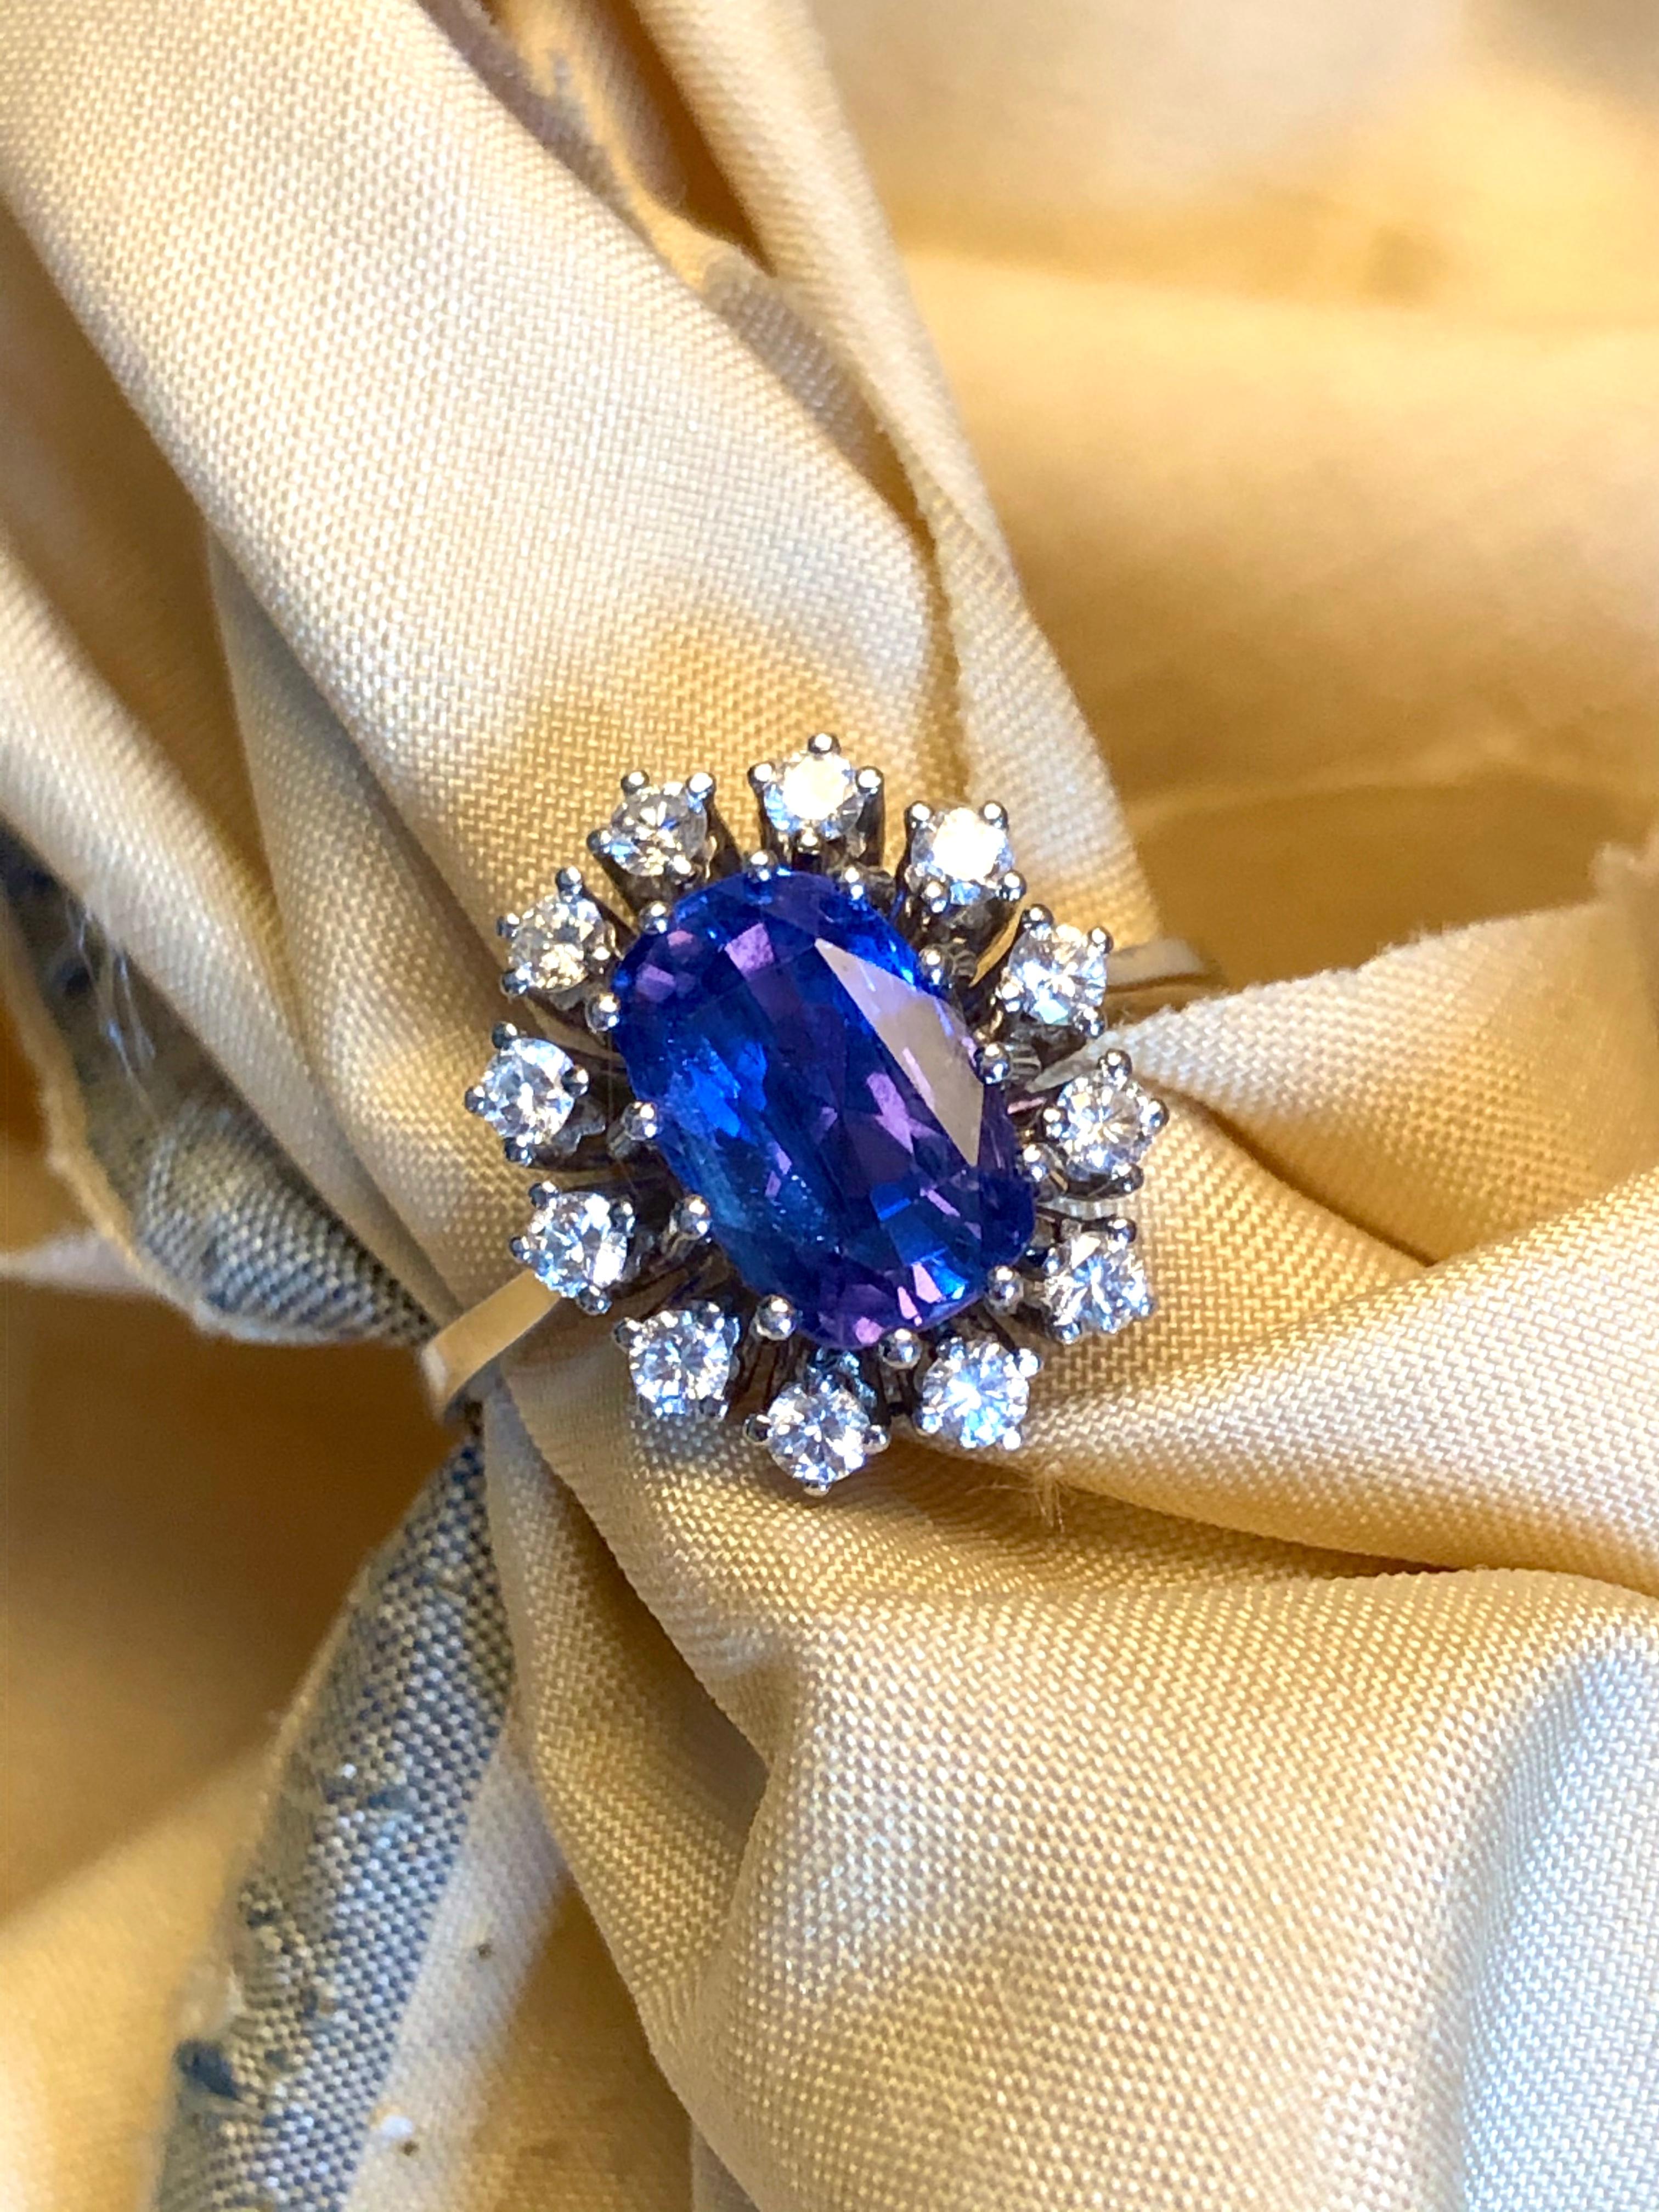 Colour-change sapphire and diamond ring, 20th century. This unheated Sri Lankan sapphire appears a striking blue in daylight, and a vivid violet in incandescent light. The reason for this unusual phenomenon is the presence of Chromium in the stone,